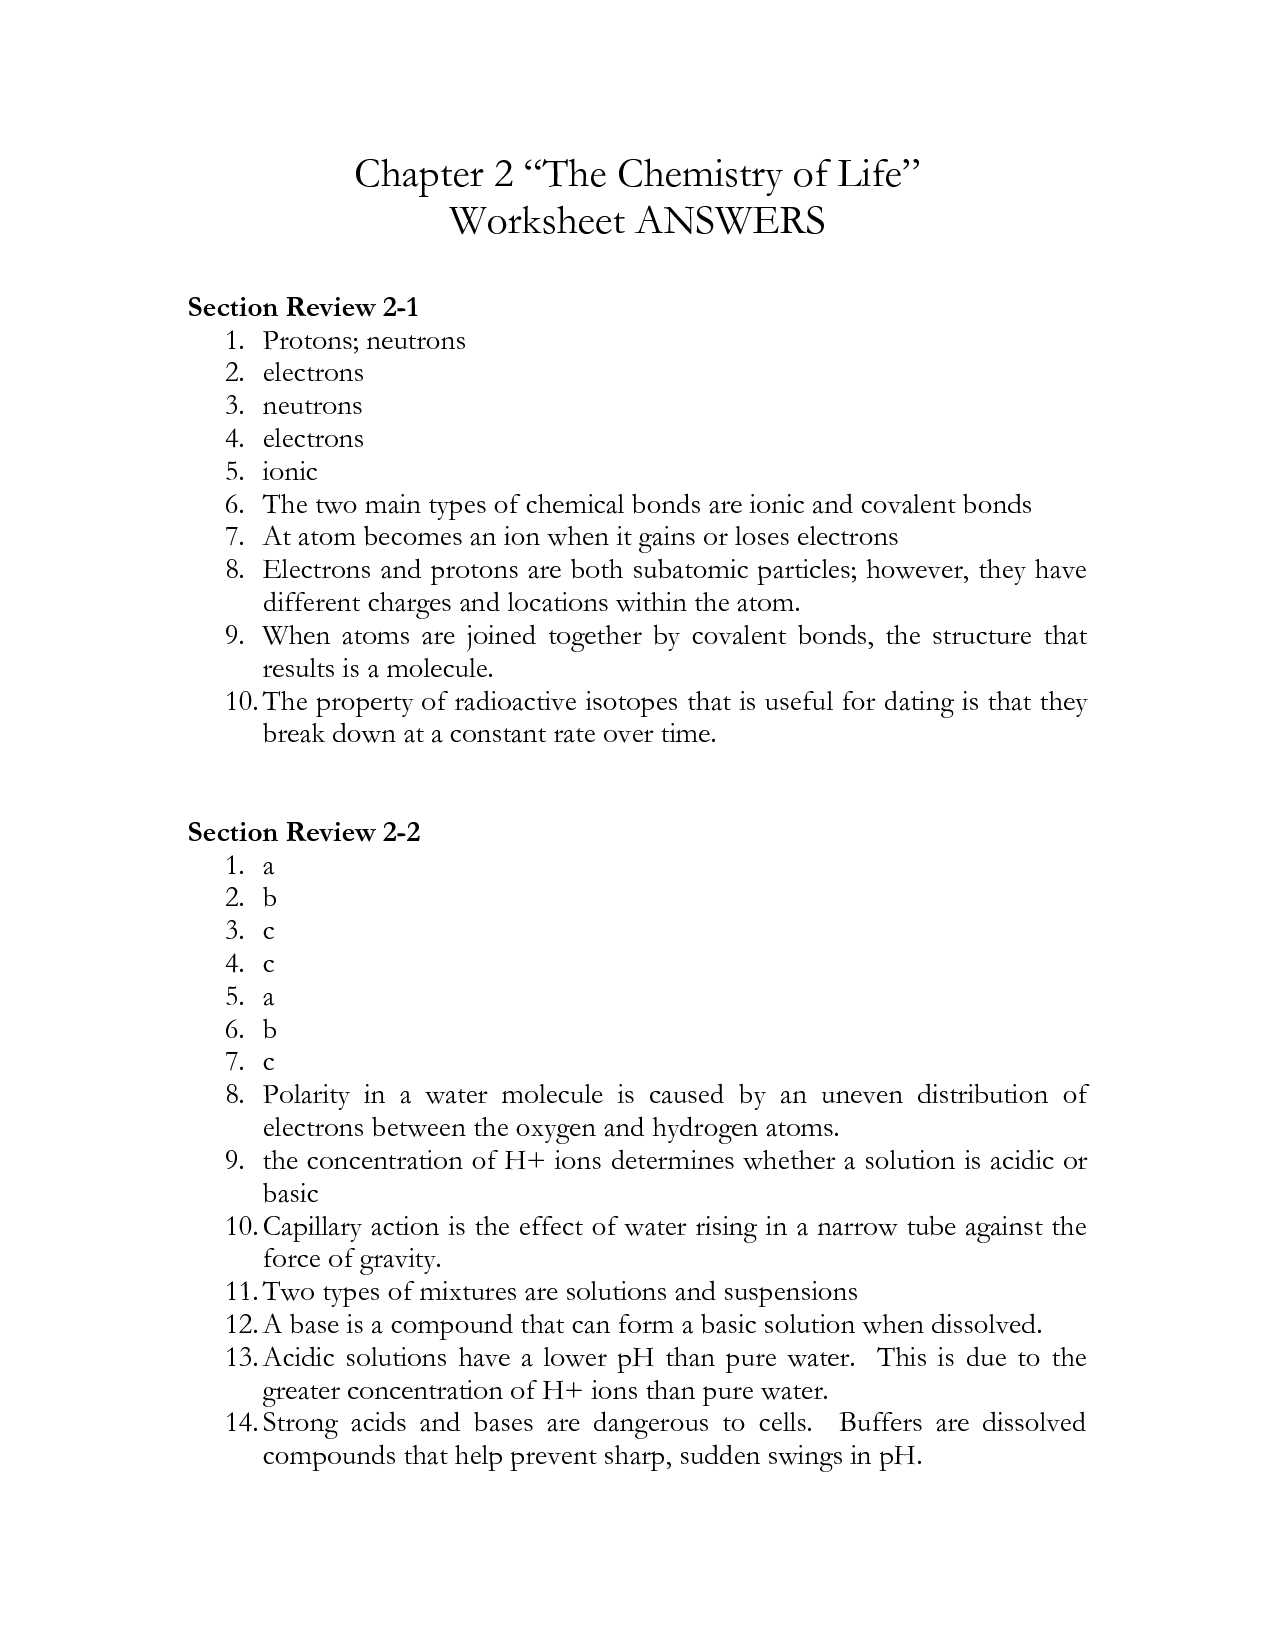 Skills Worksheet Concept Review Answer Key Holt Environmental Science as Well as Fair Holt Biology Vocabulary Review Skills Worksheet Cells and